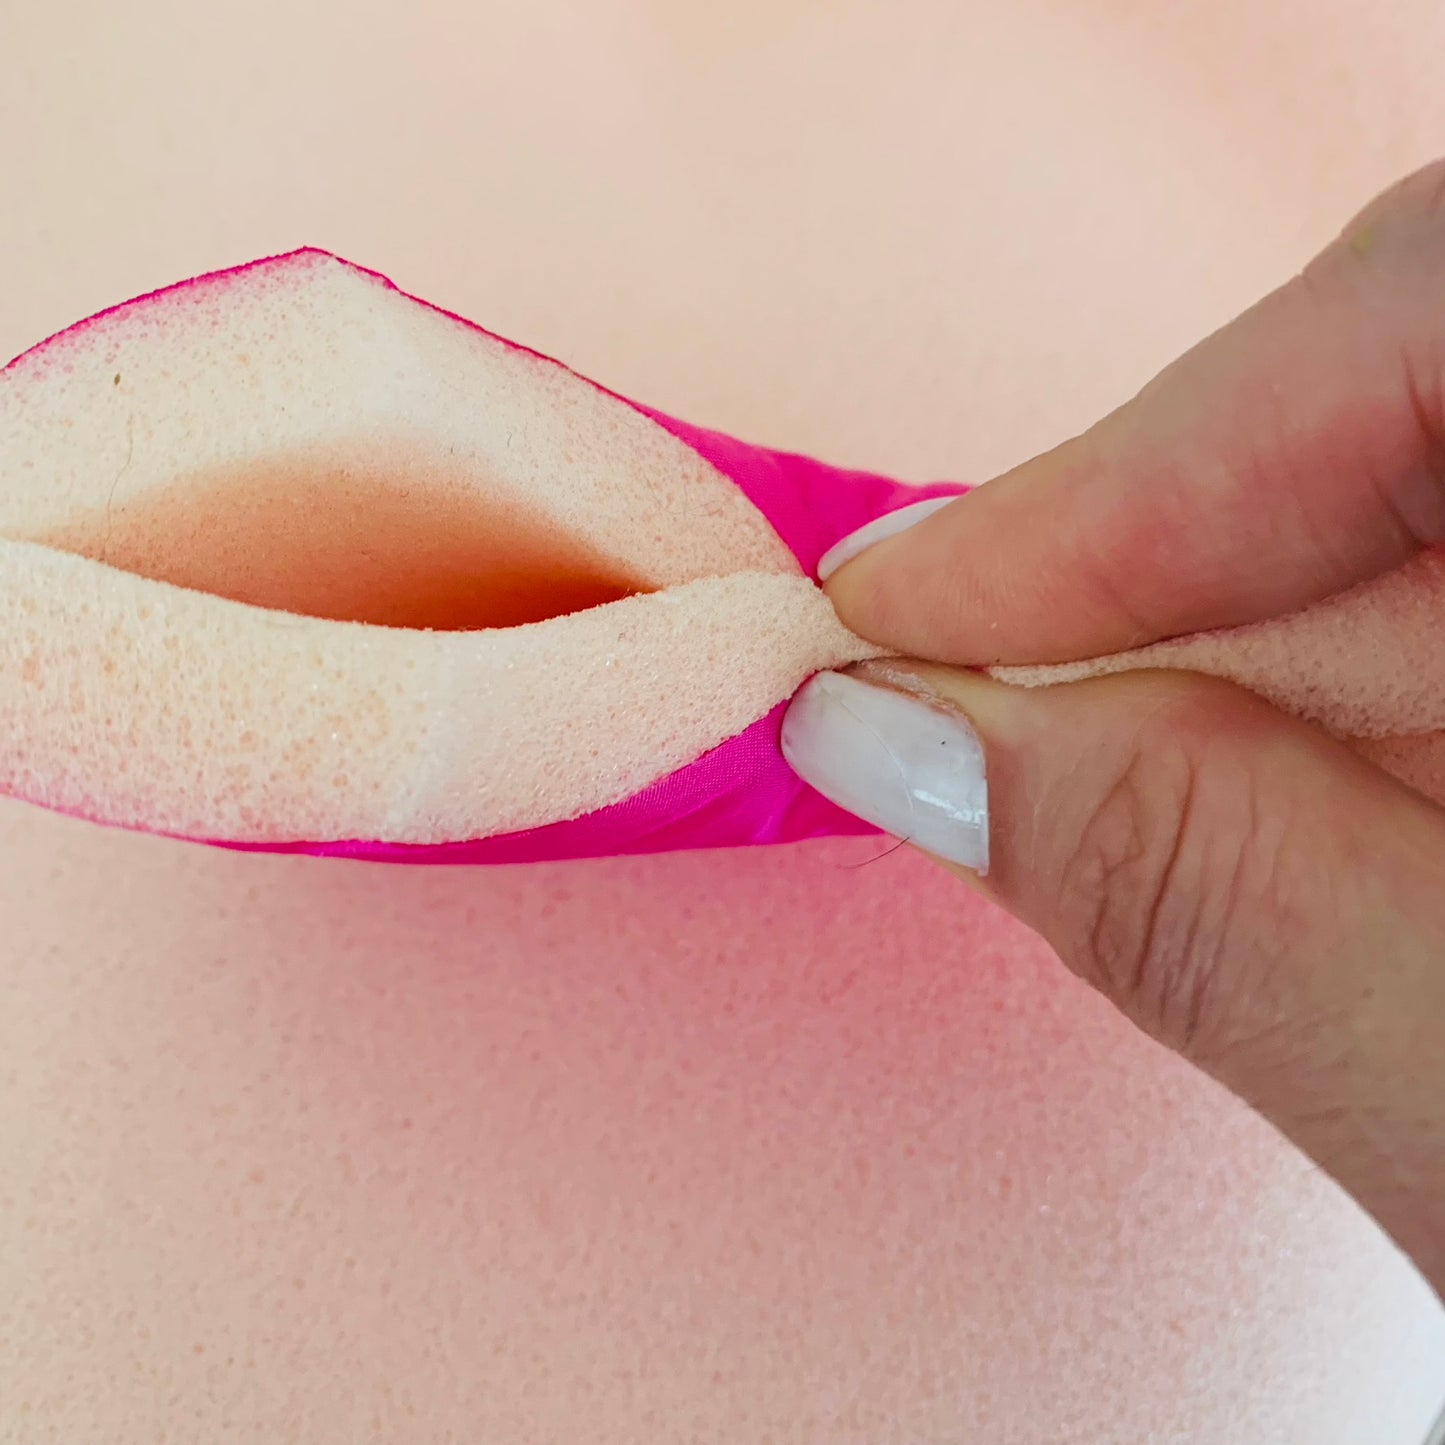 We Love PINK! Light Support Pointe Puffs Toe Pads